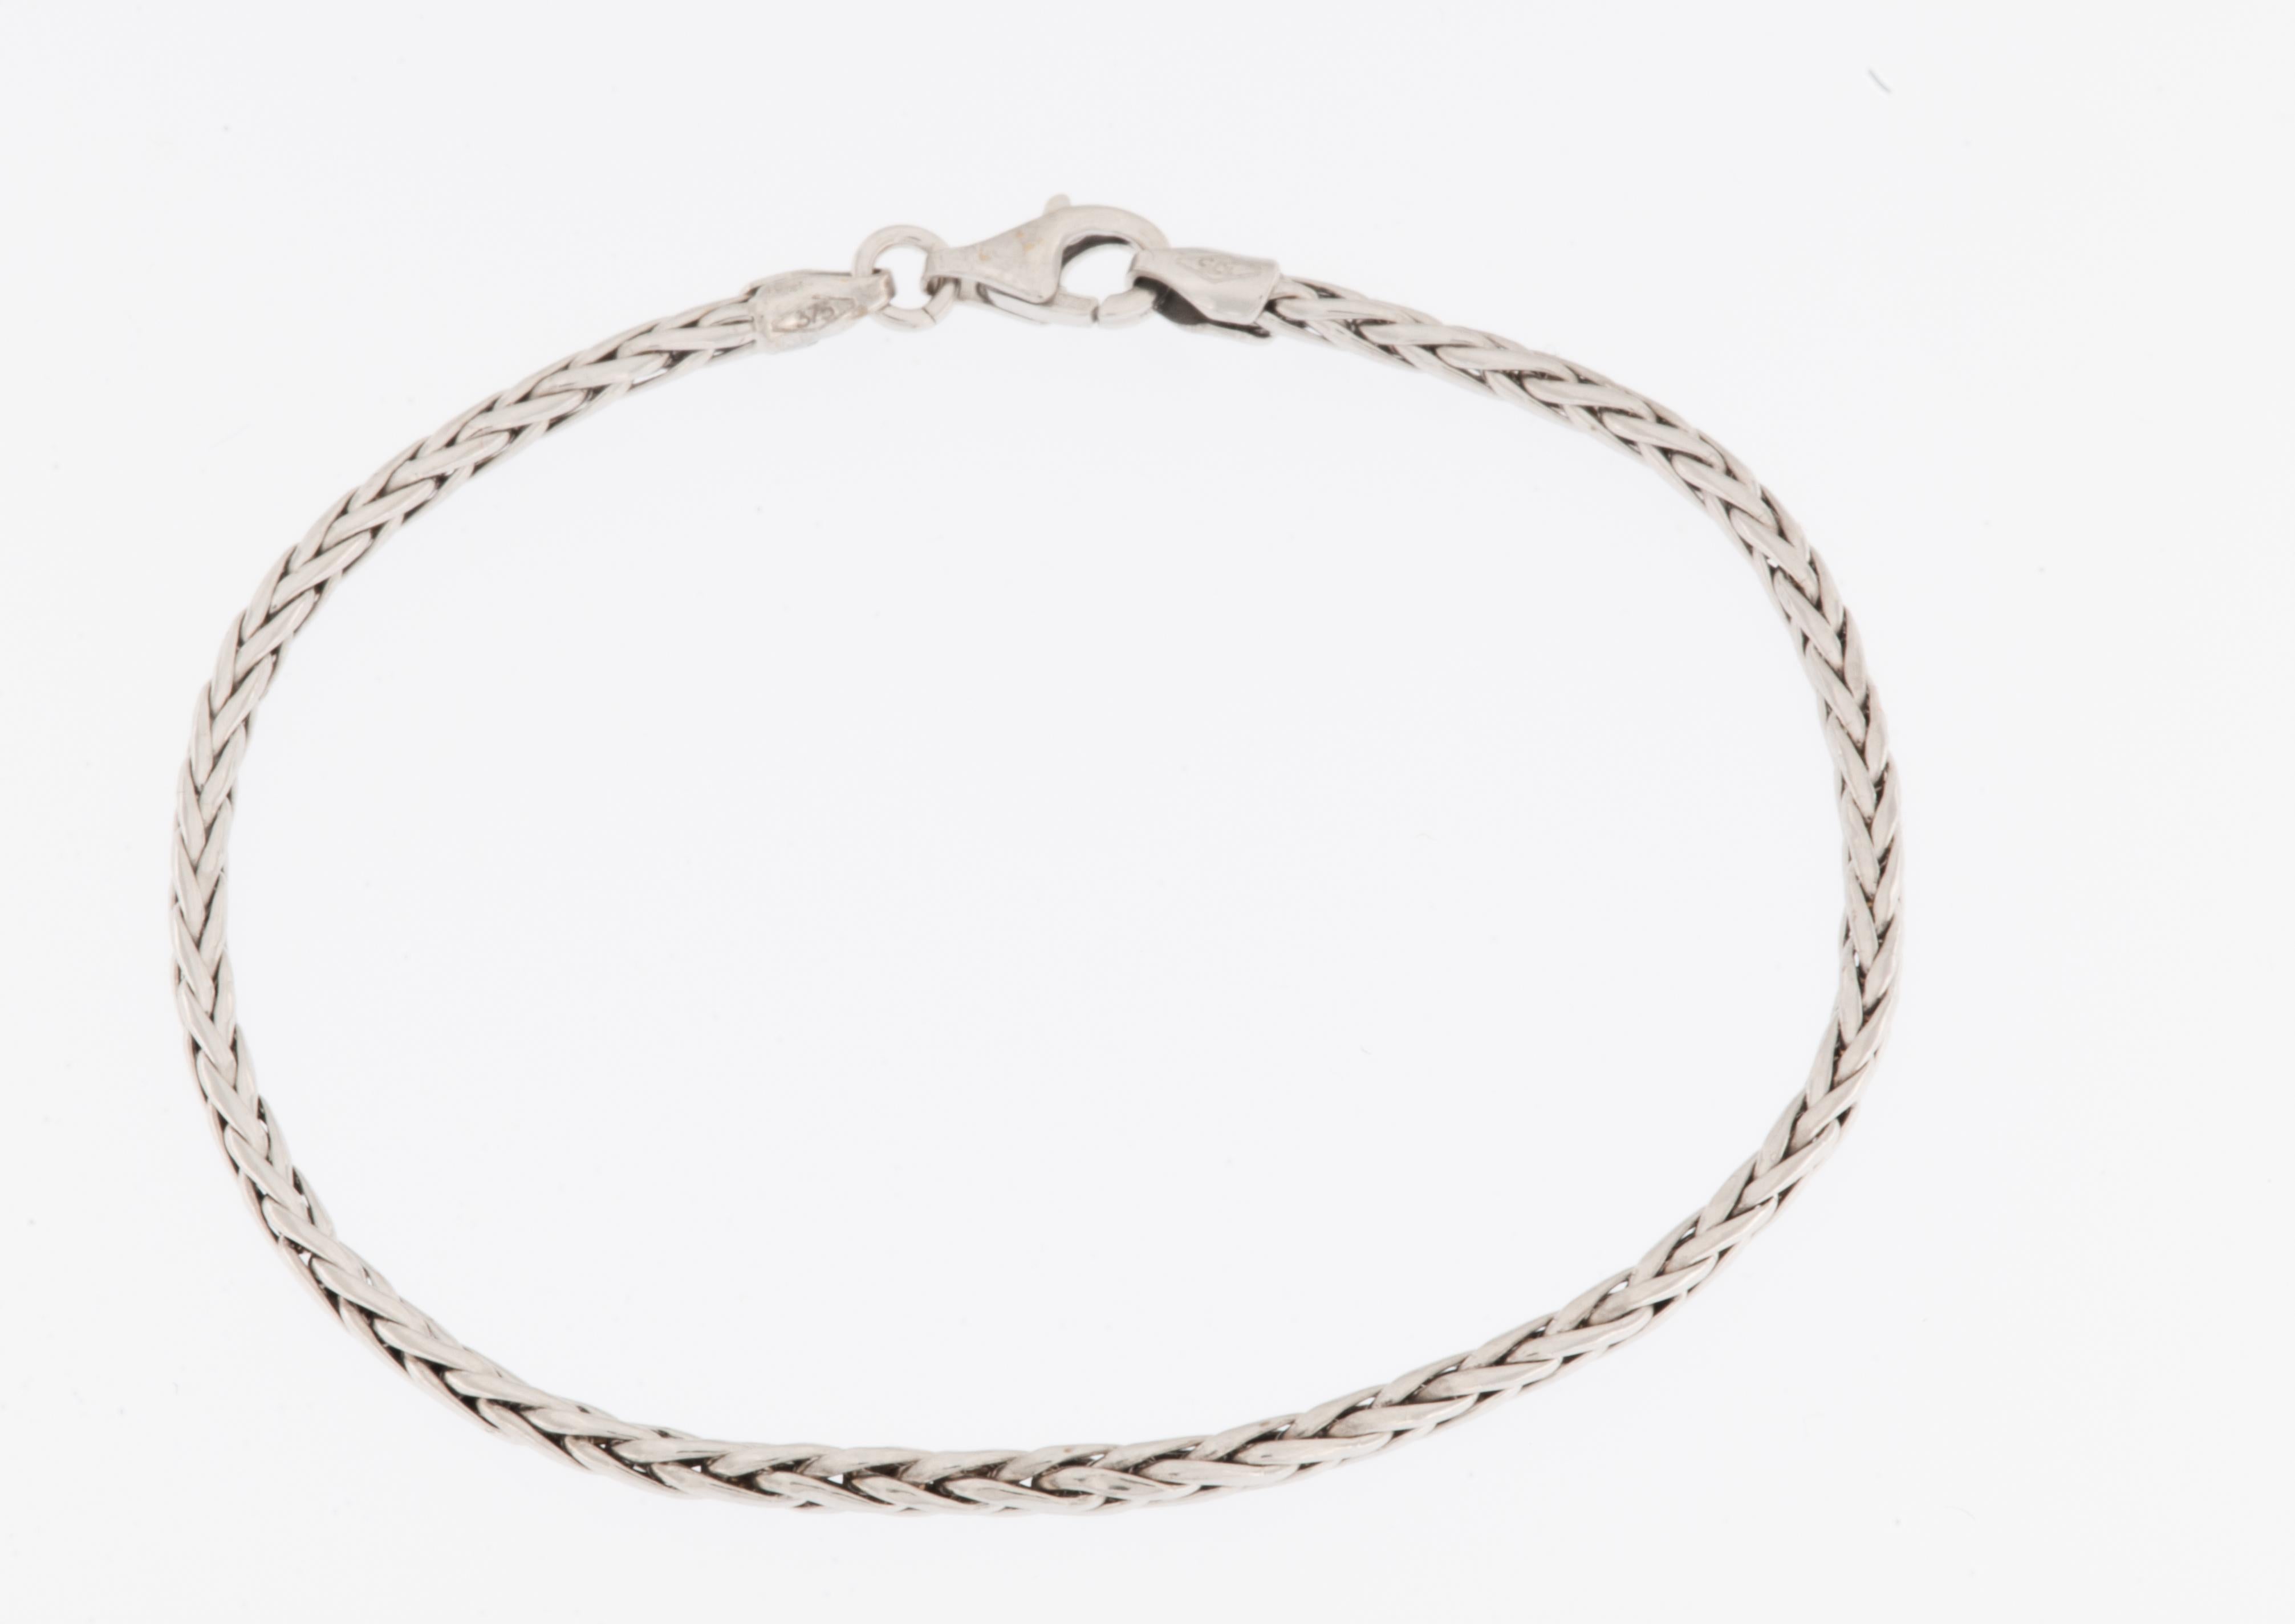 The Italian 9kt White Gold Bracelet is a beautiful piece of jewelry made from 9 karat (9kt) white gold and crafted in Italy. 

The 